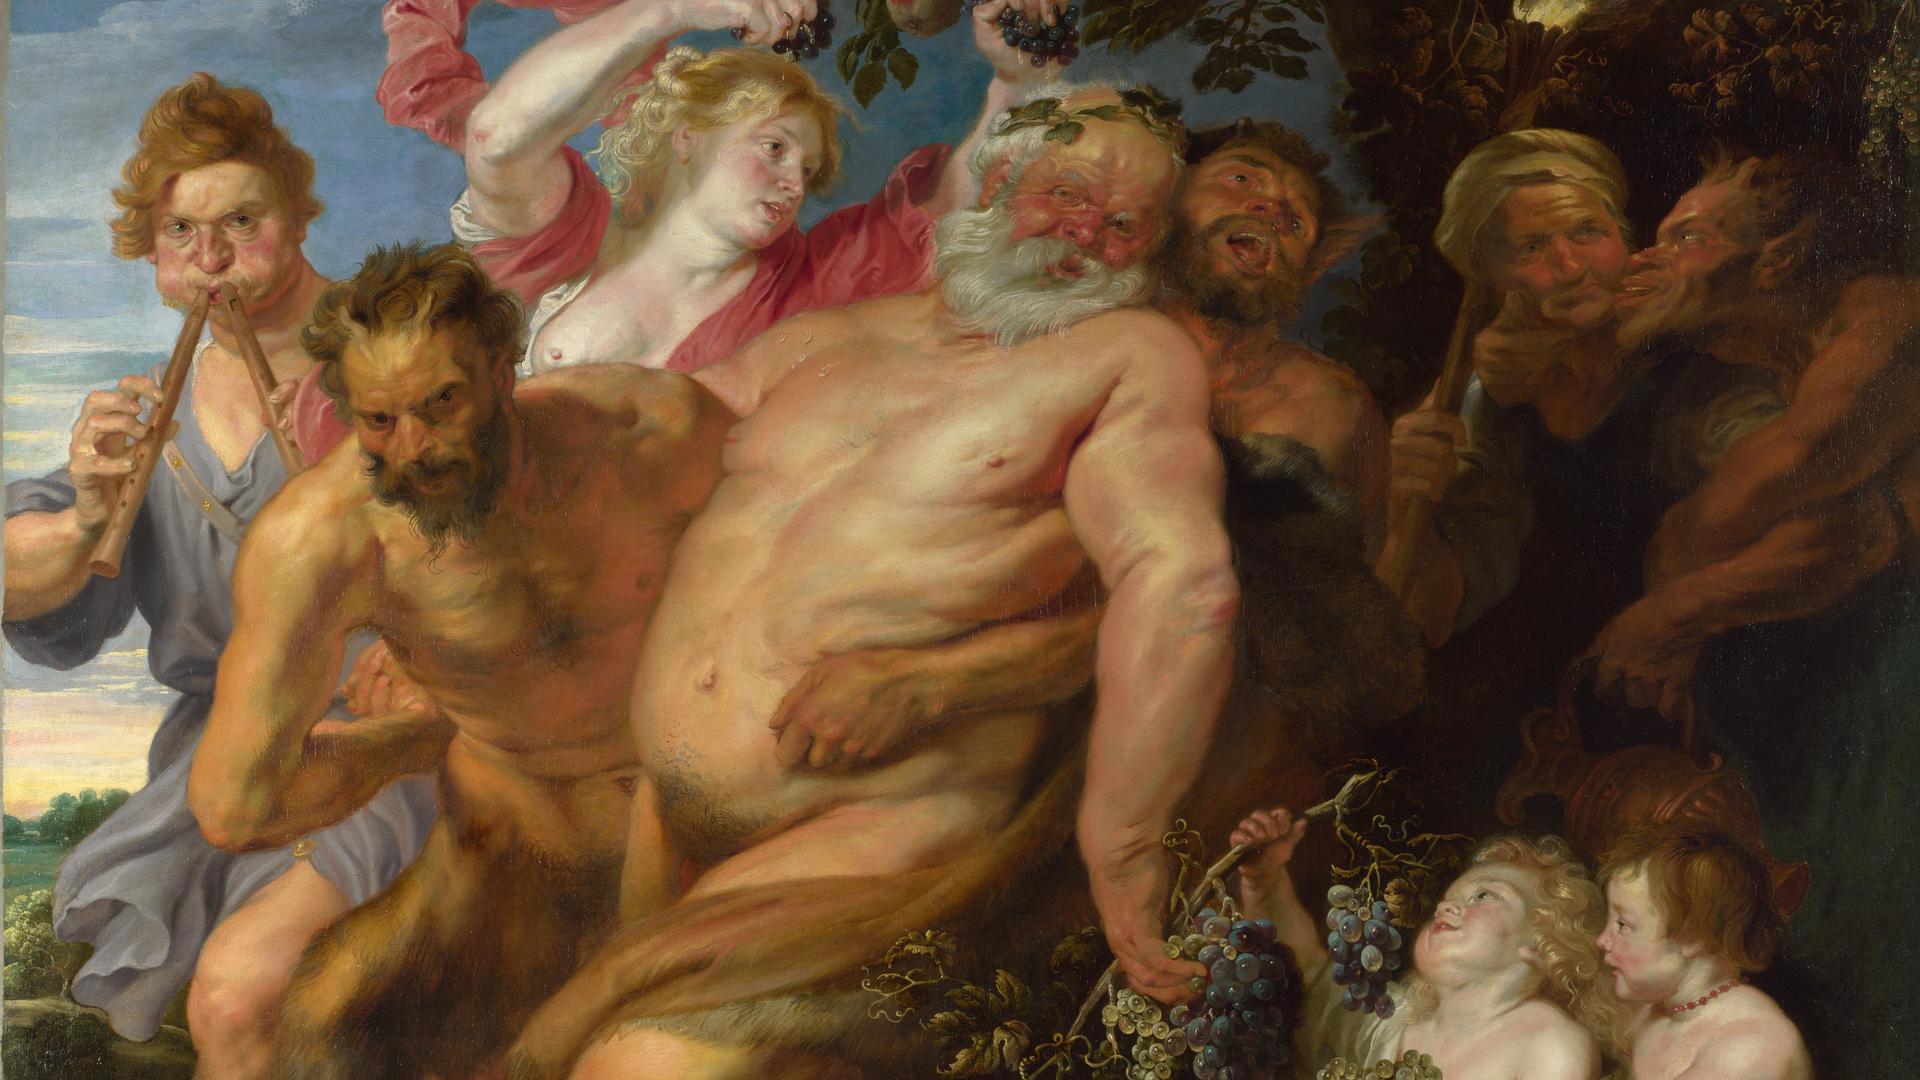 Drunken Silenus supported by Satyrs by Possibly by Anthony van Dyck